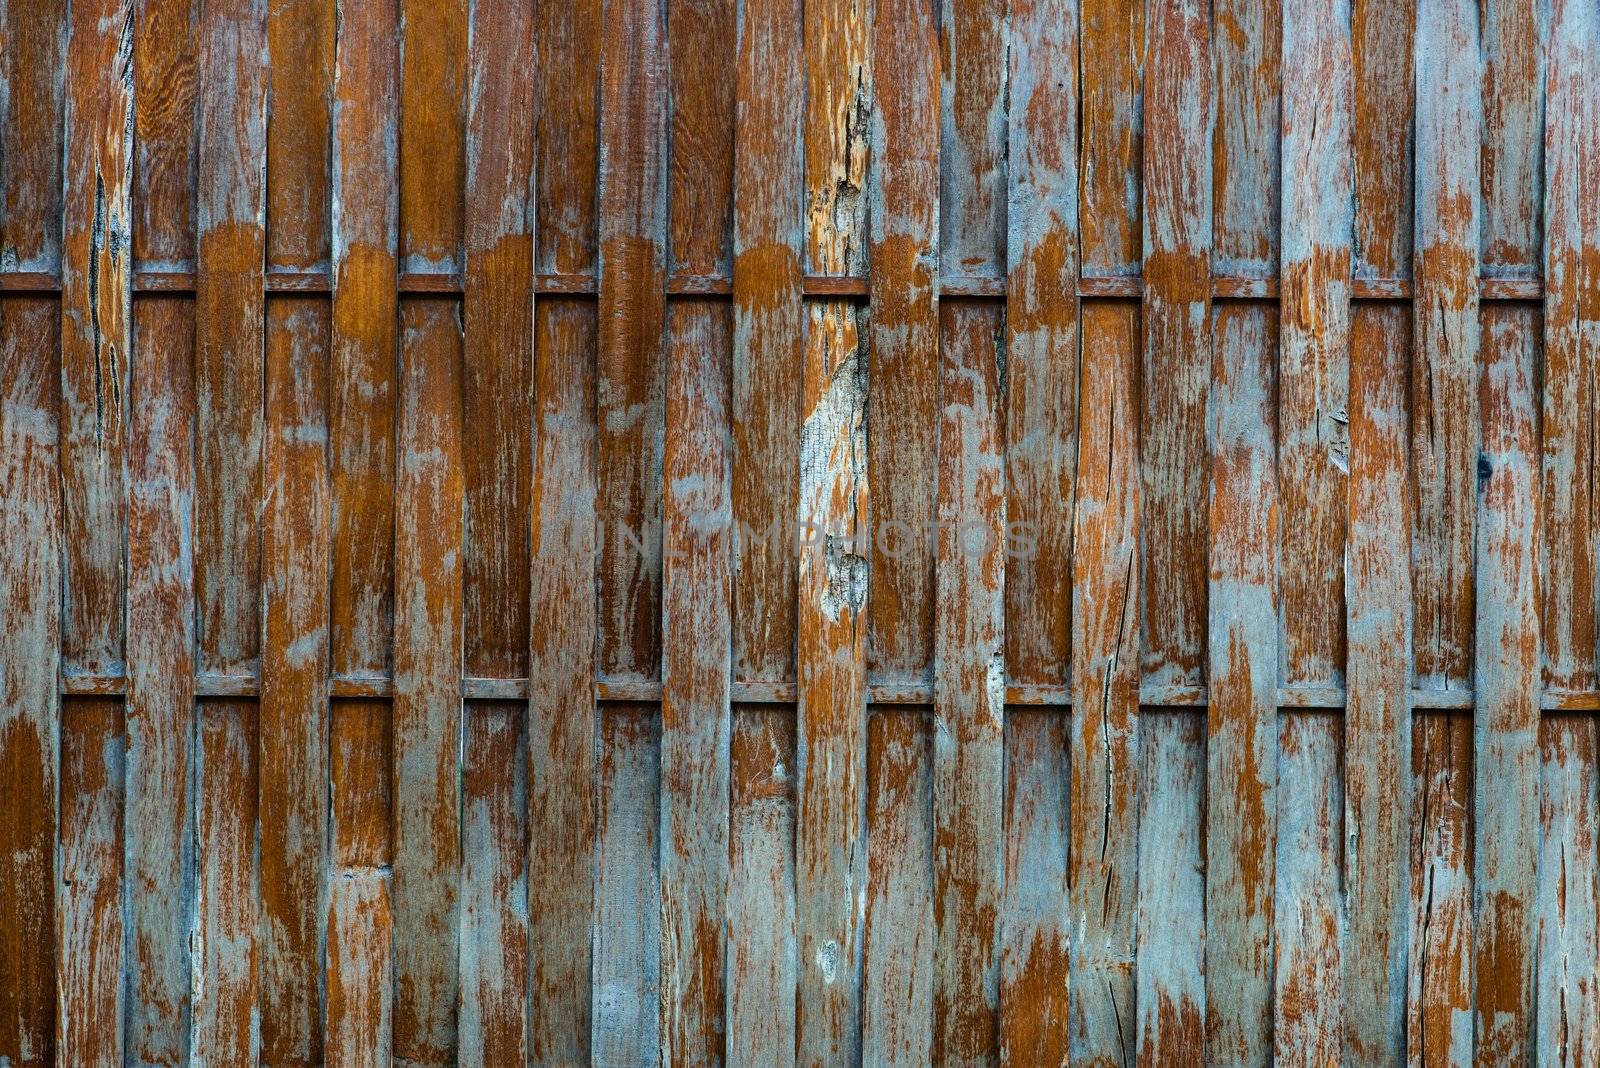 Warned wood texture, very old and weather hardened wood platform.